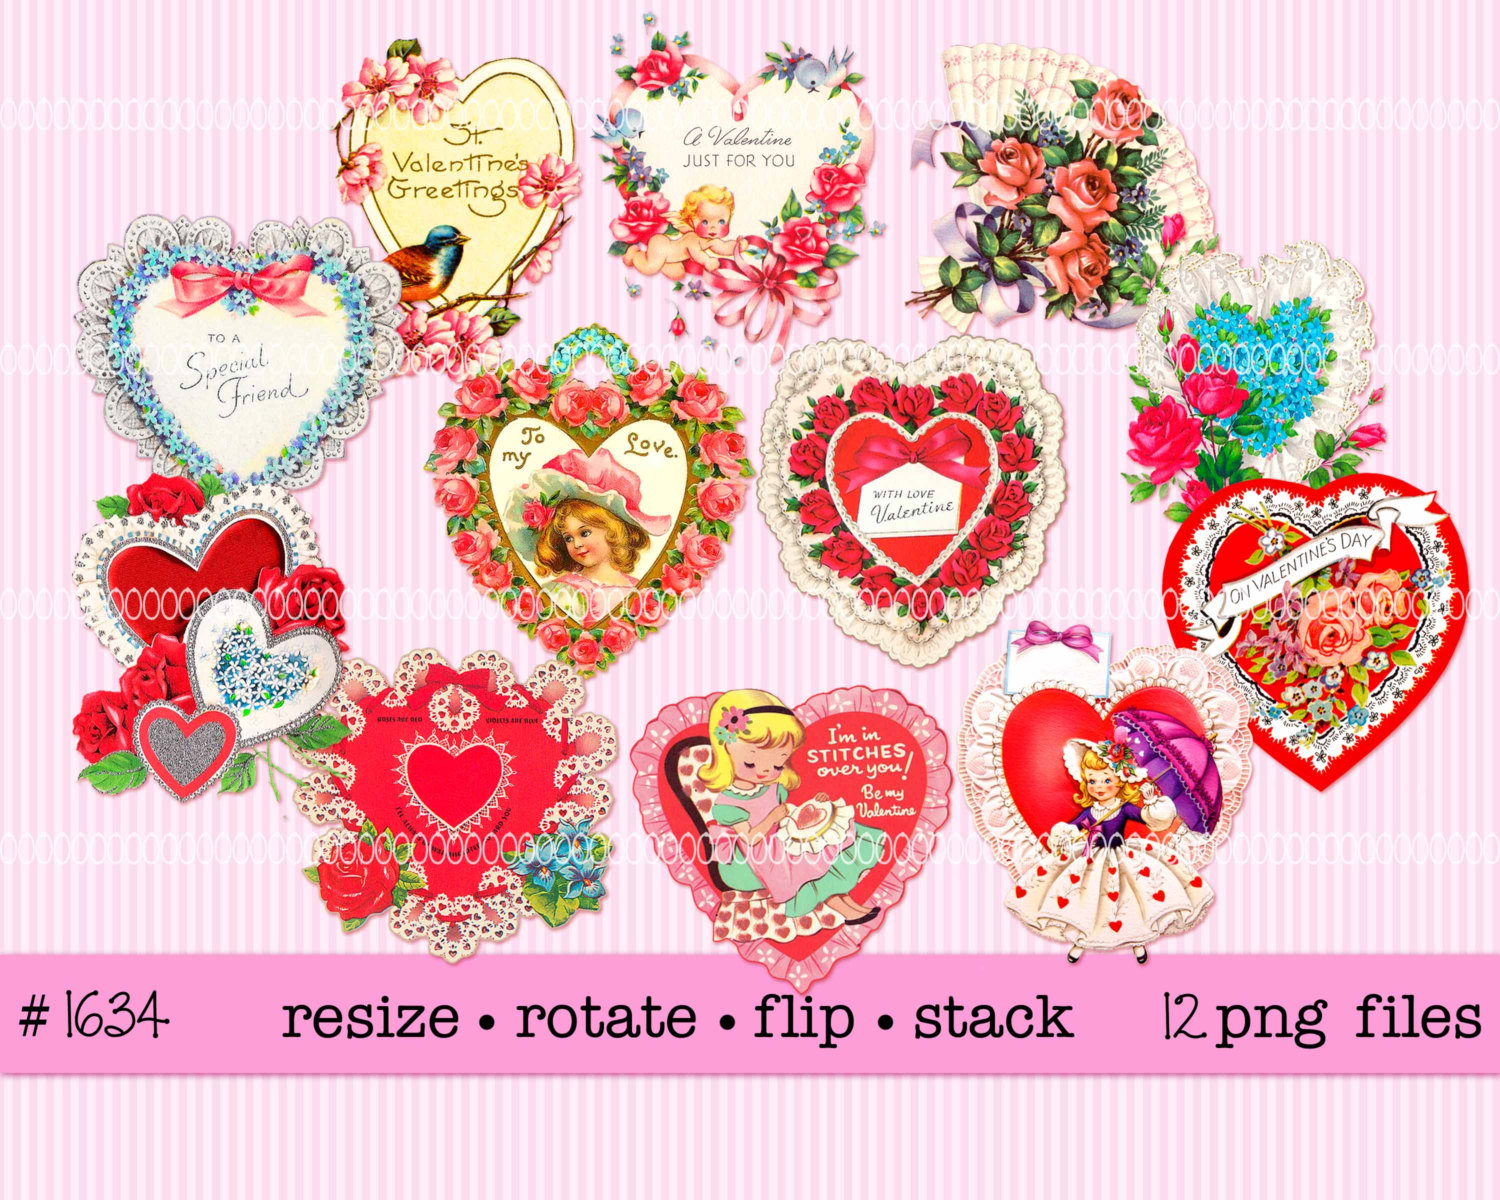 Vintage Valentines hearts lace ribbons roses.